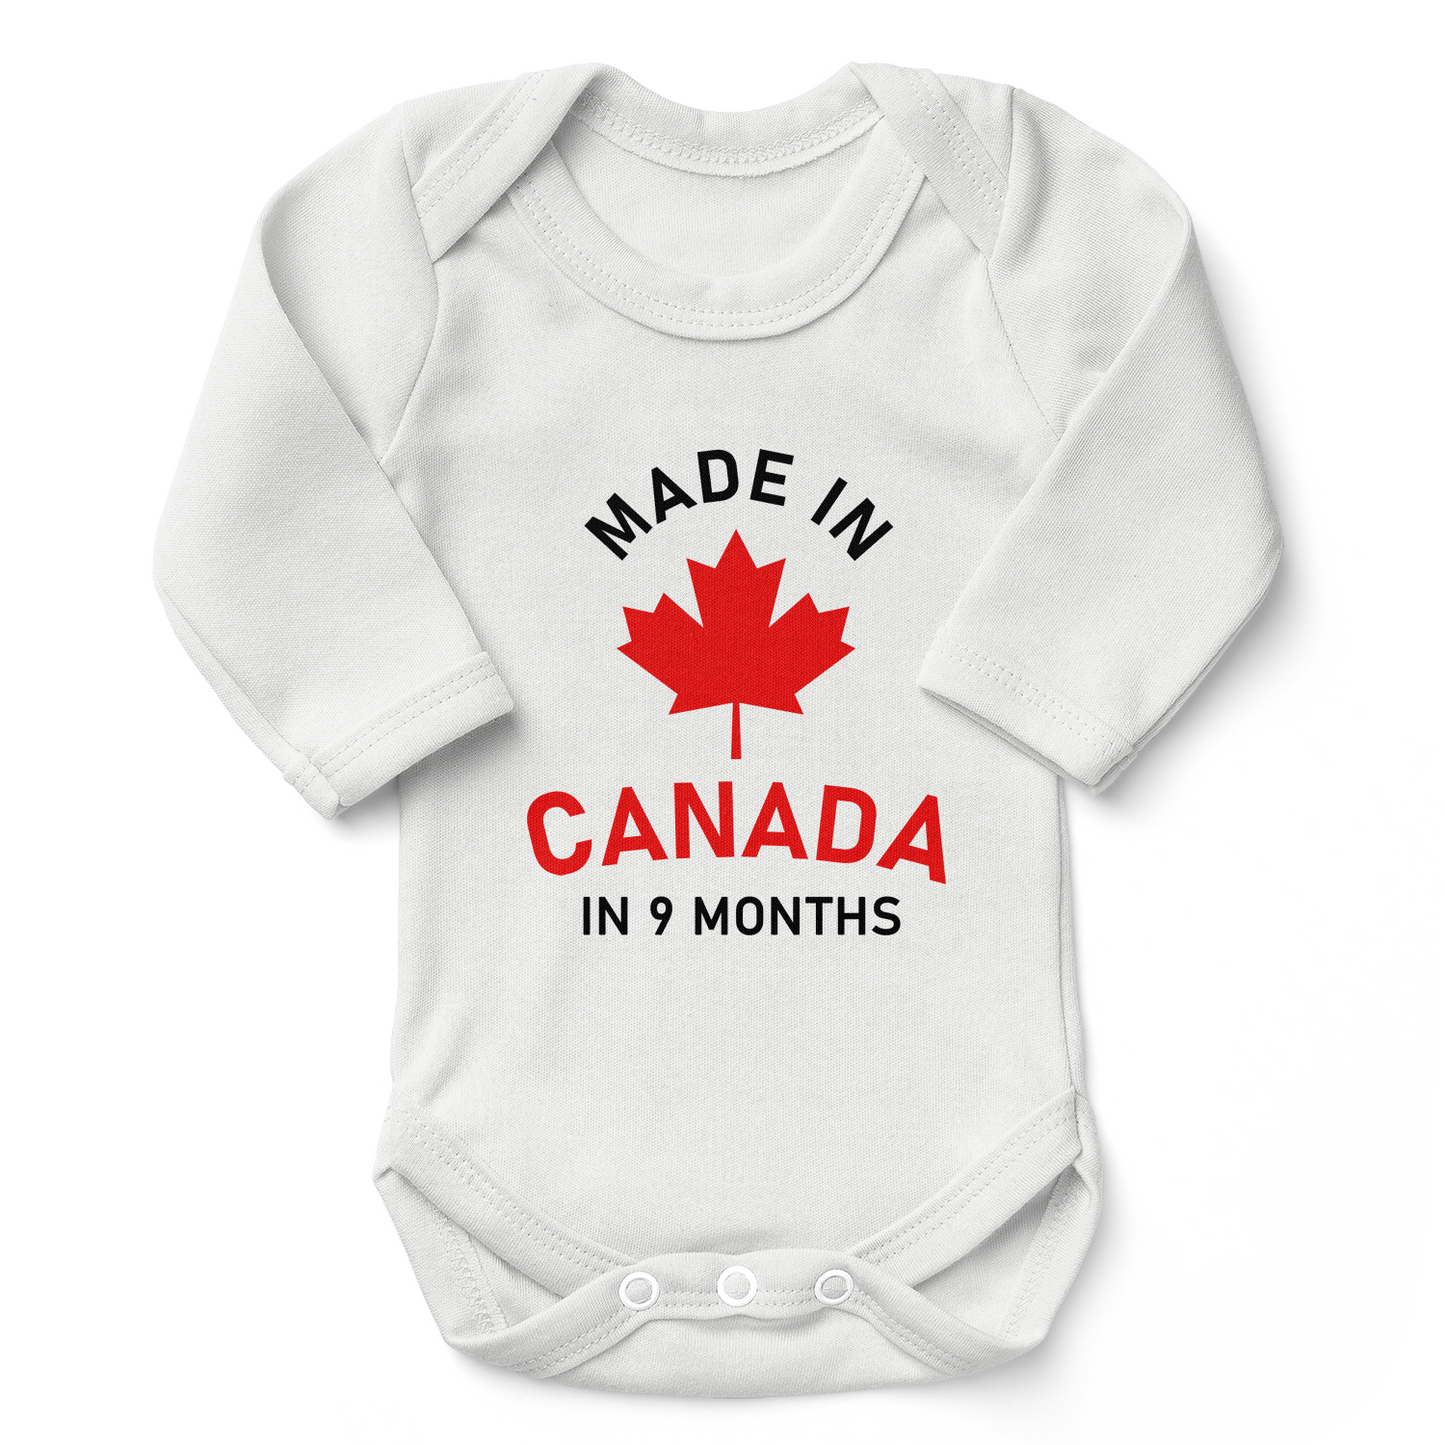 Endanzoo Organic Baby Bodysuit - Made in Canada in 9 Months